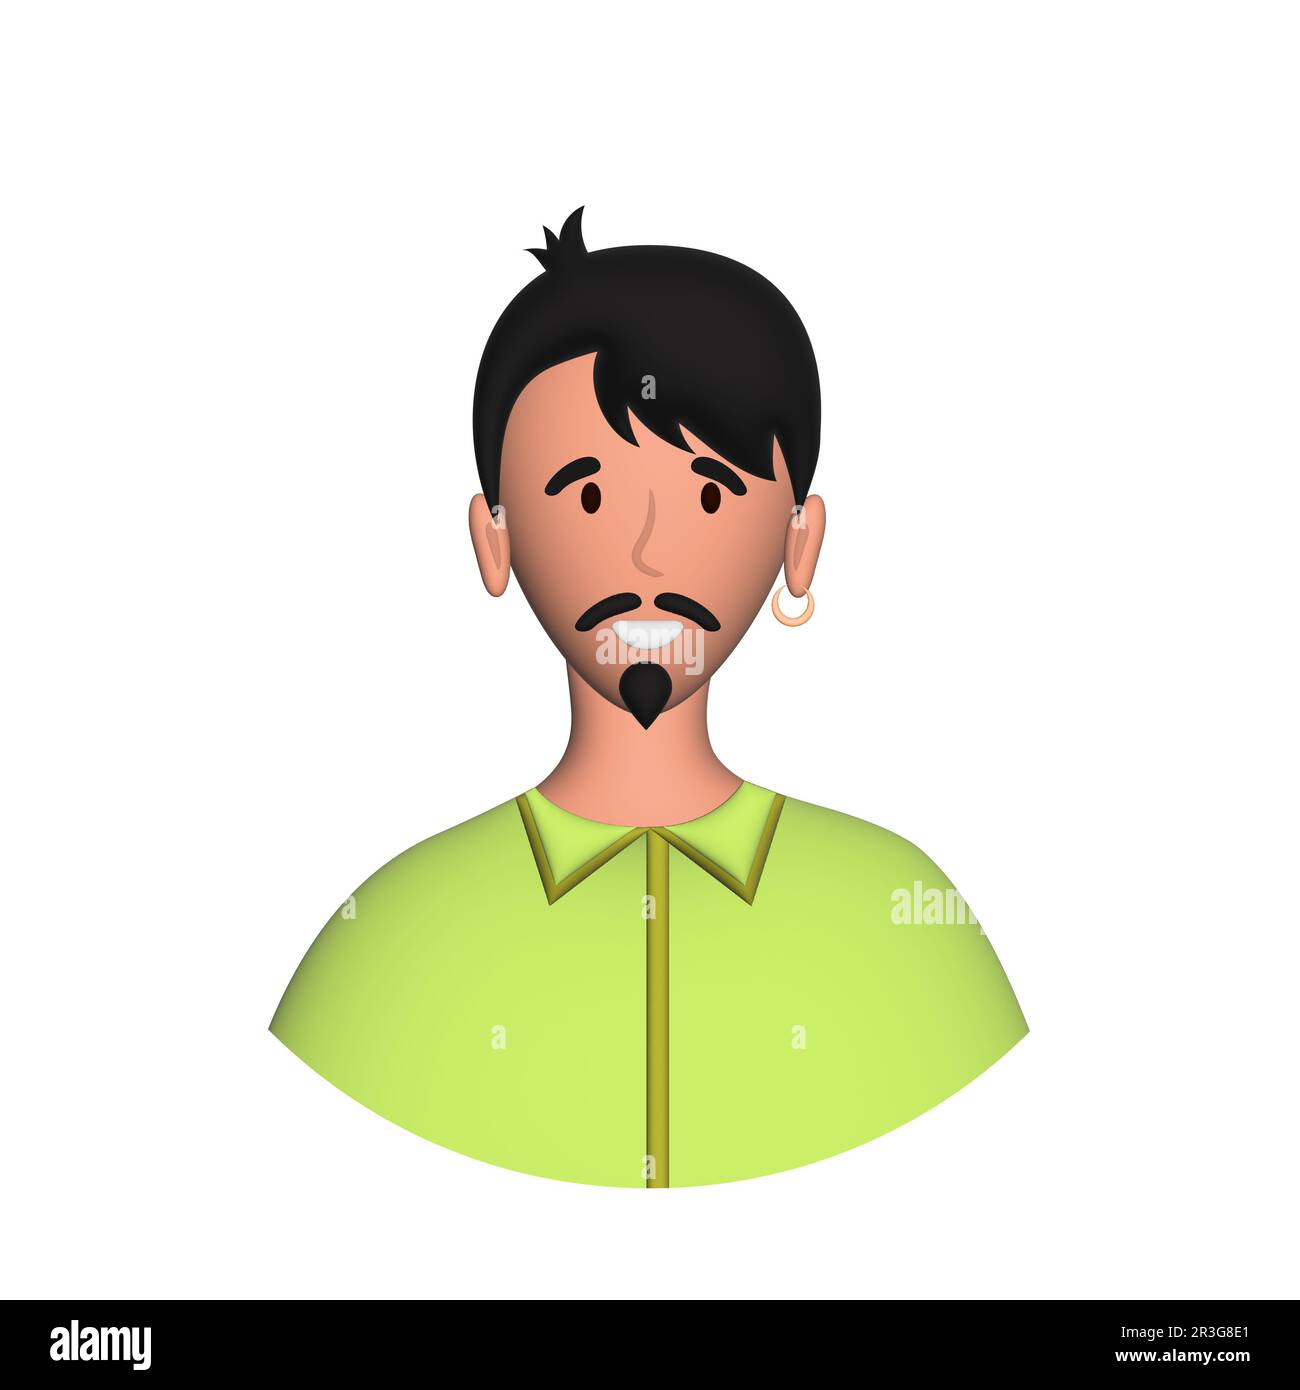 Web icon man, middle-aged man with mustache Stock Photo